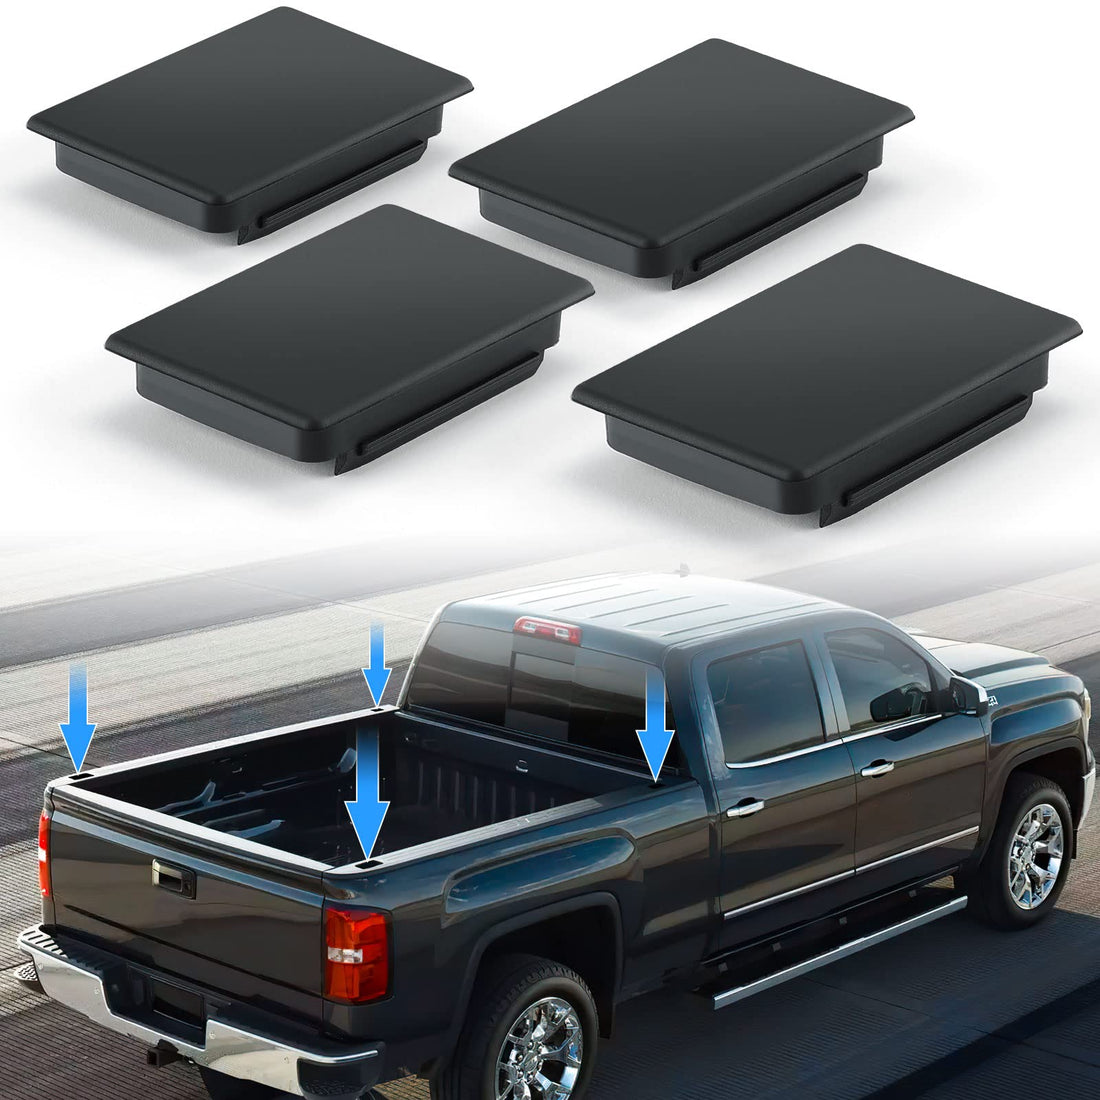 Stake Pocket Cover Trucks Bed Rail Stake Covers Compatible with 1999-2014 Chevy Silverado and 2010-2014 GMC Sierra - 4 Pack